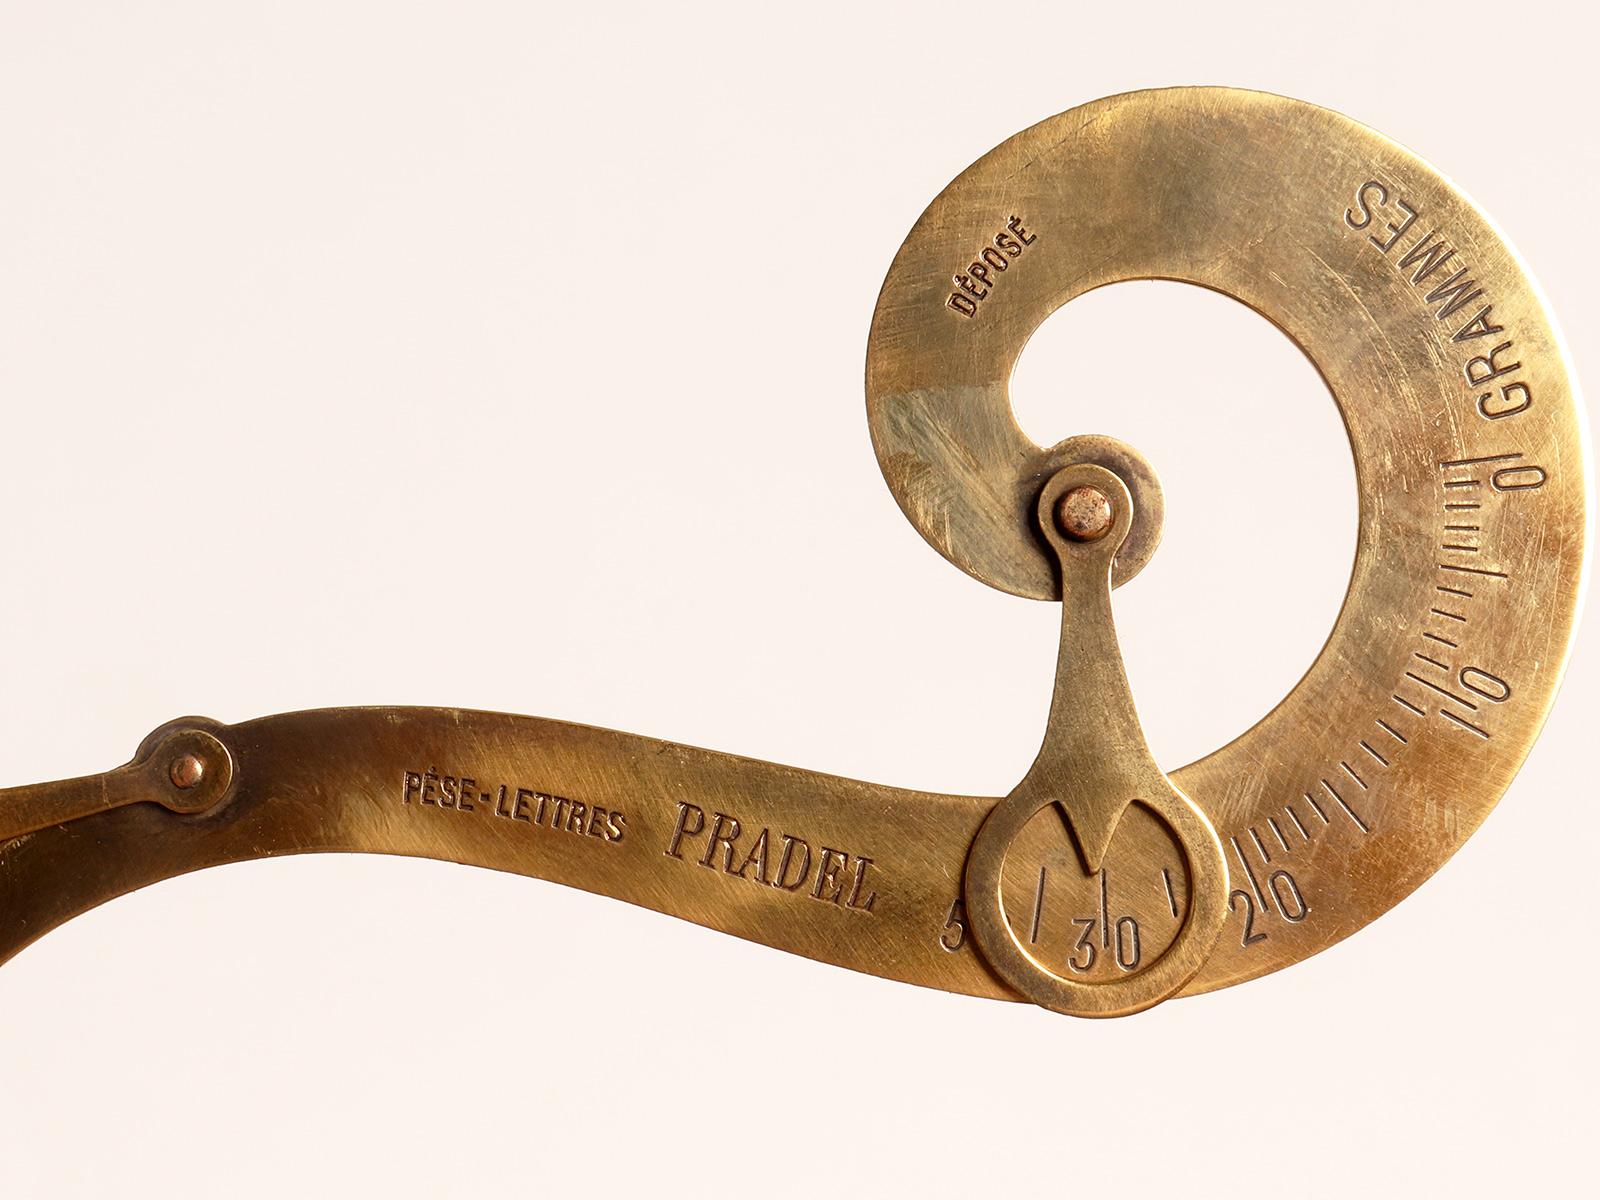 19th Century A scale weighs travel letters, France 1880.  For Sale